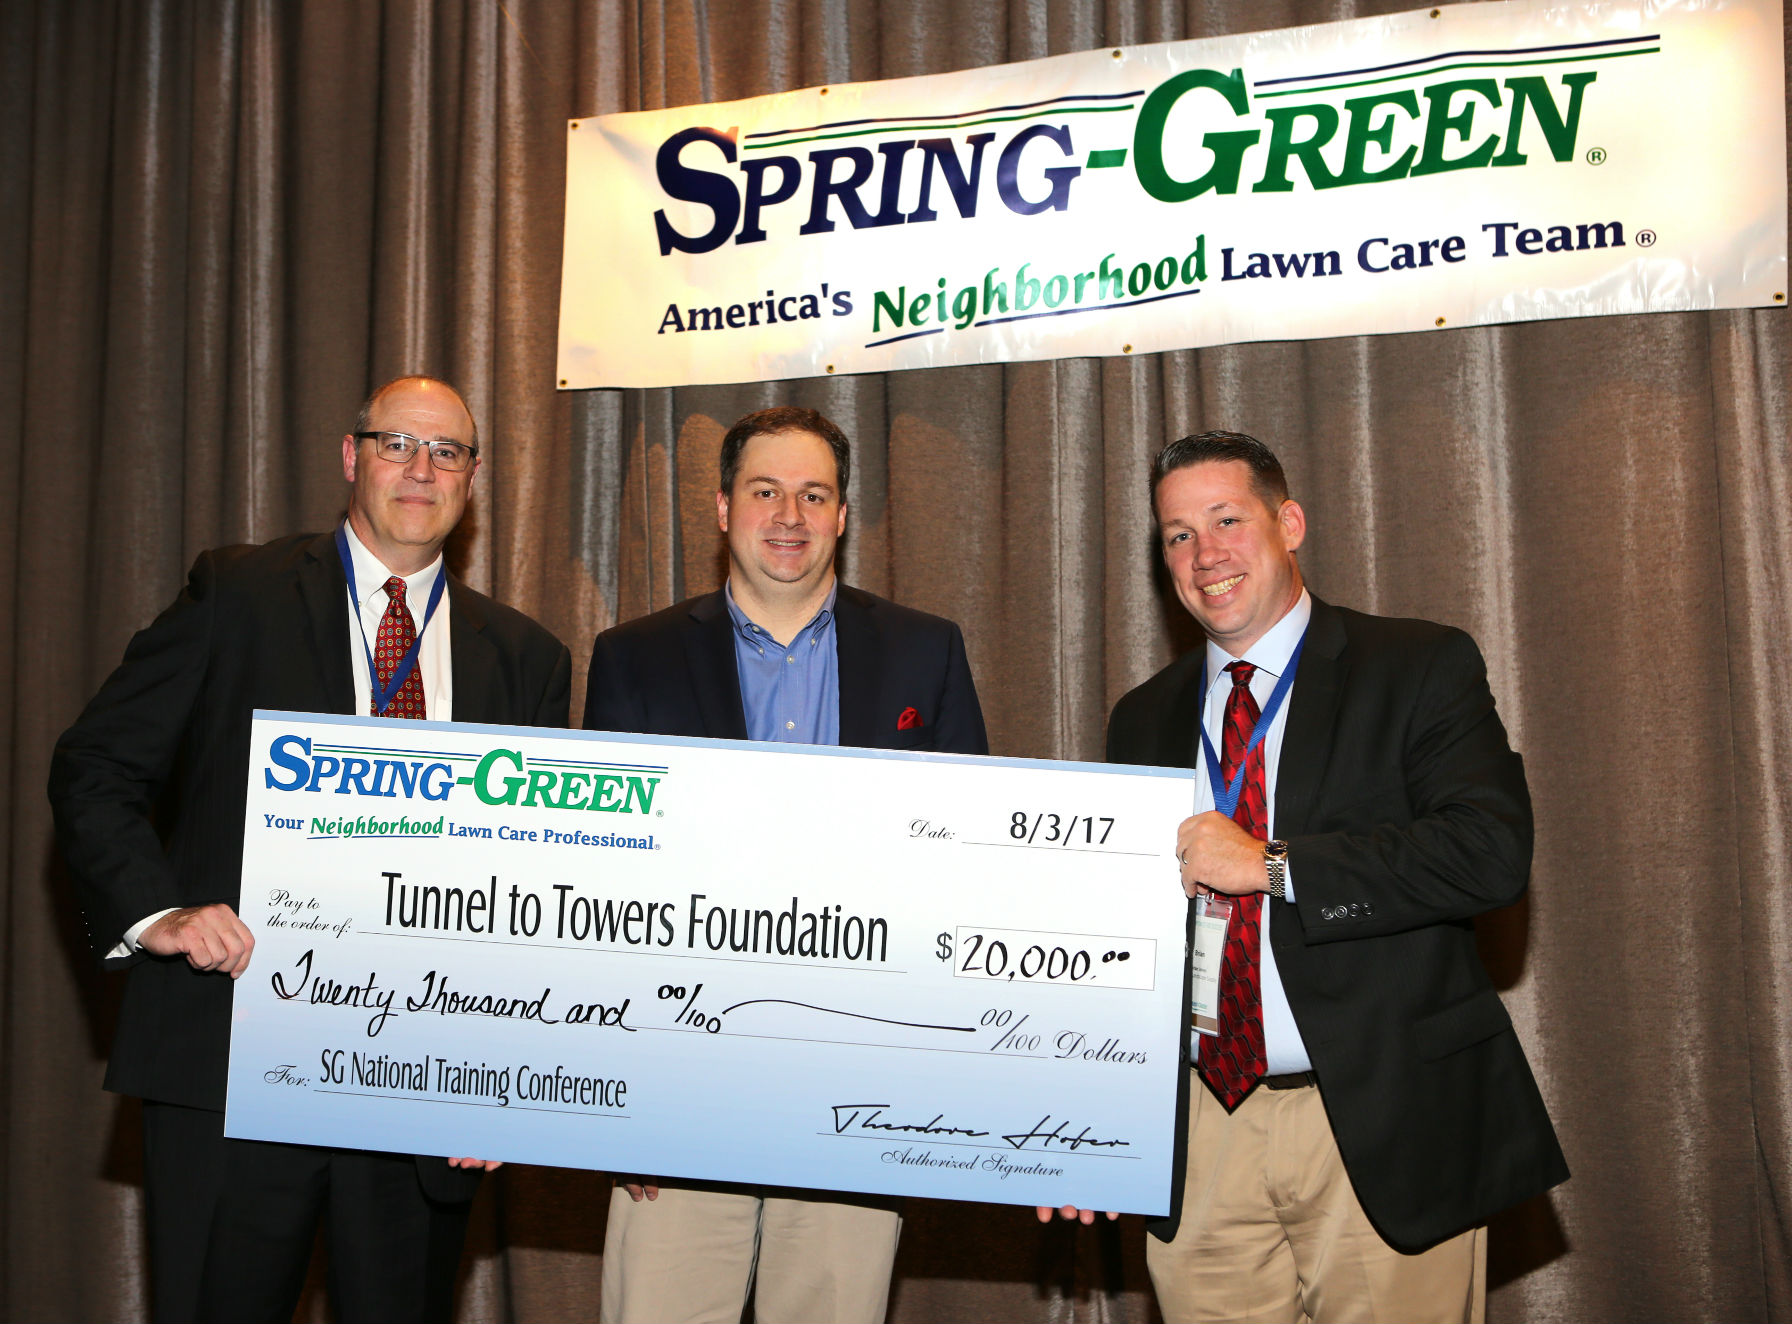 Spring-Green and Tunnel to Towers Foundation Check Presentation